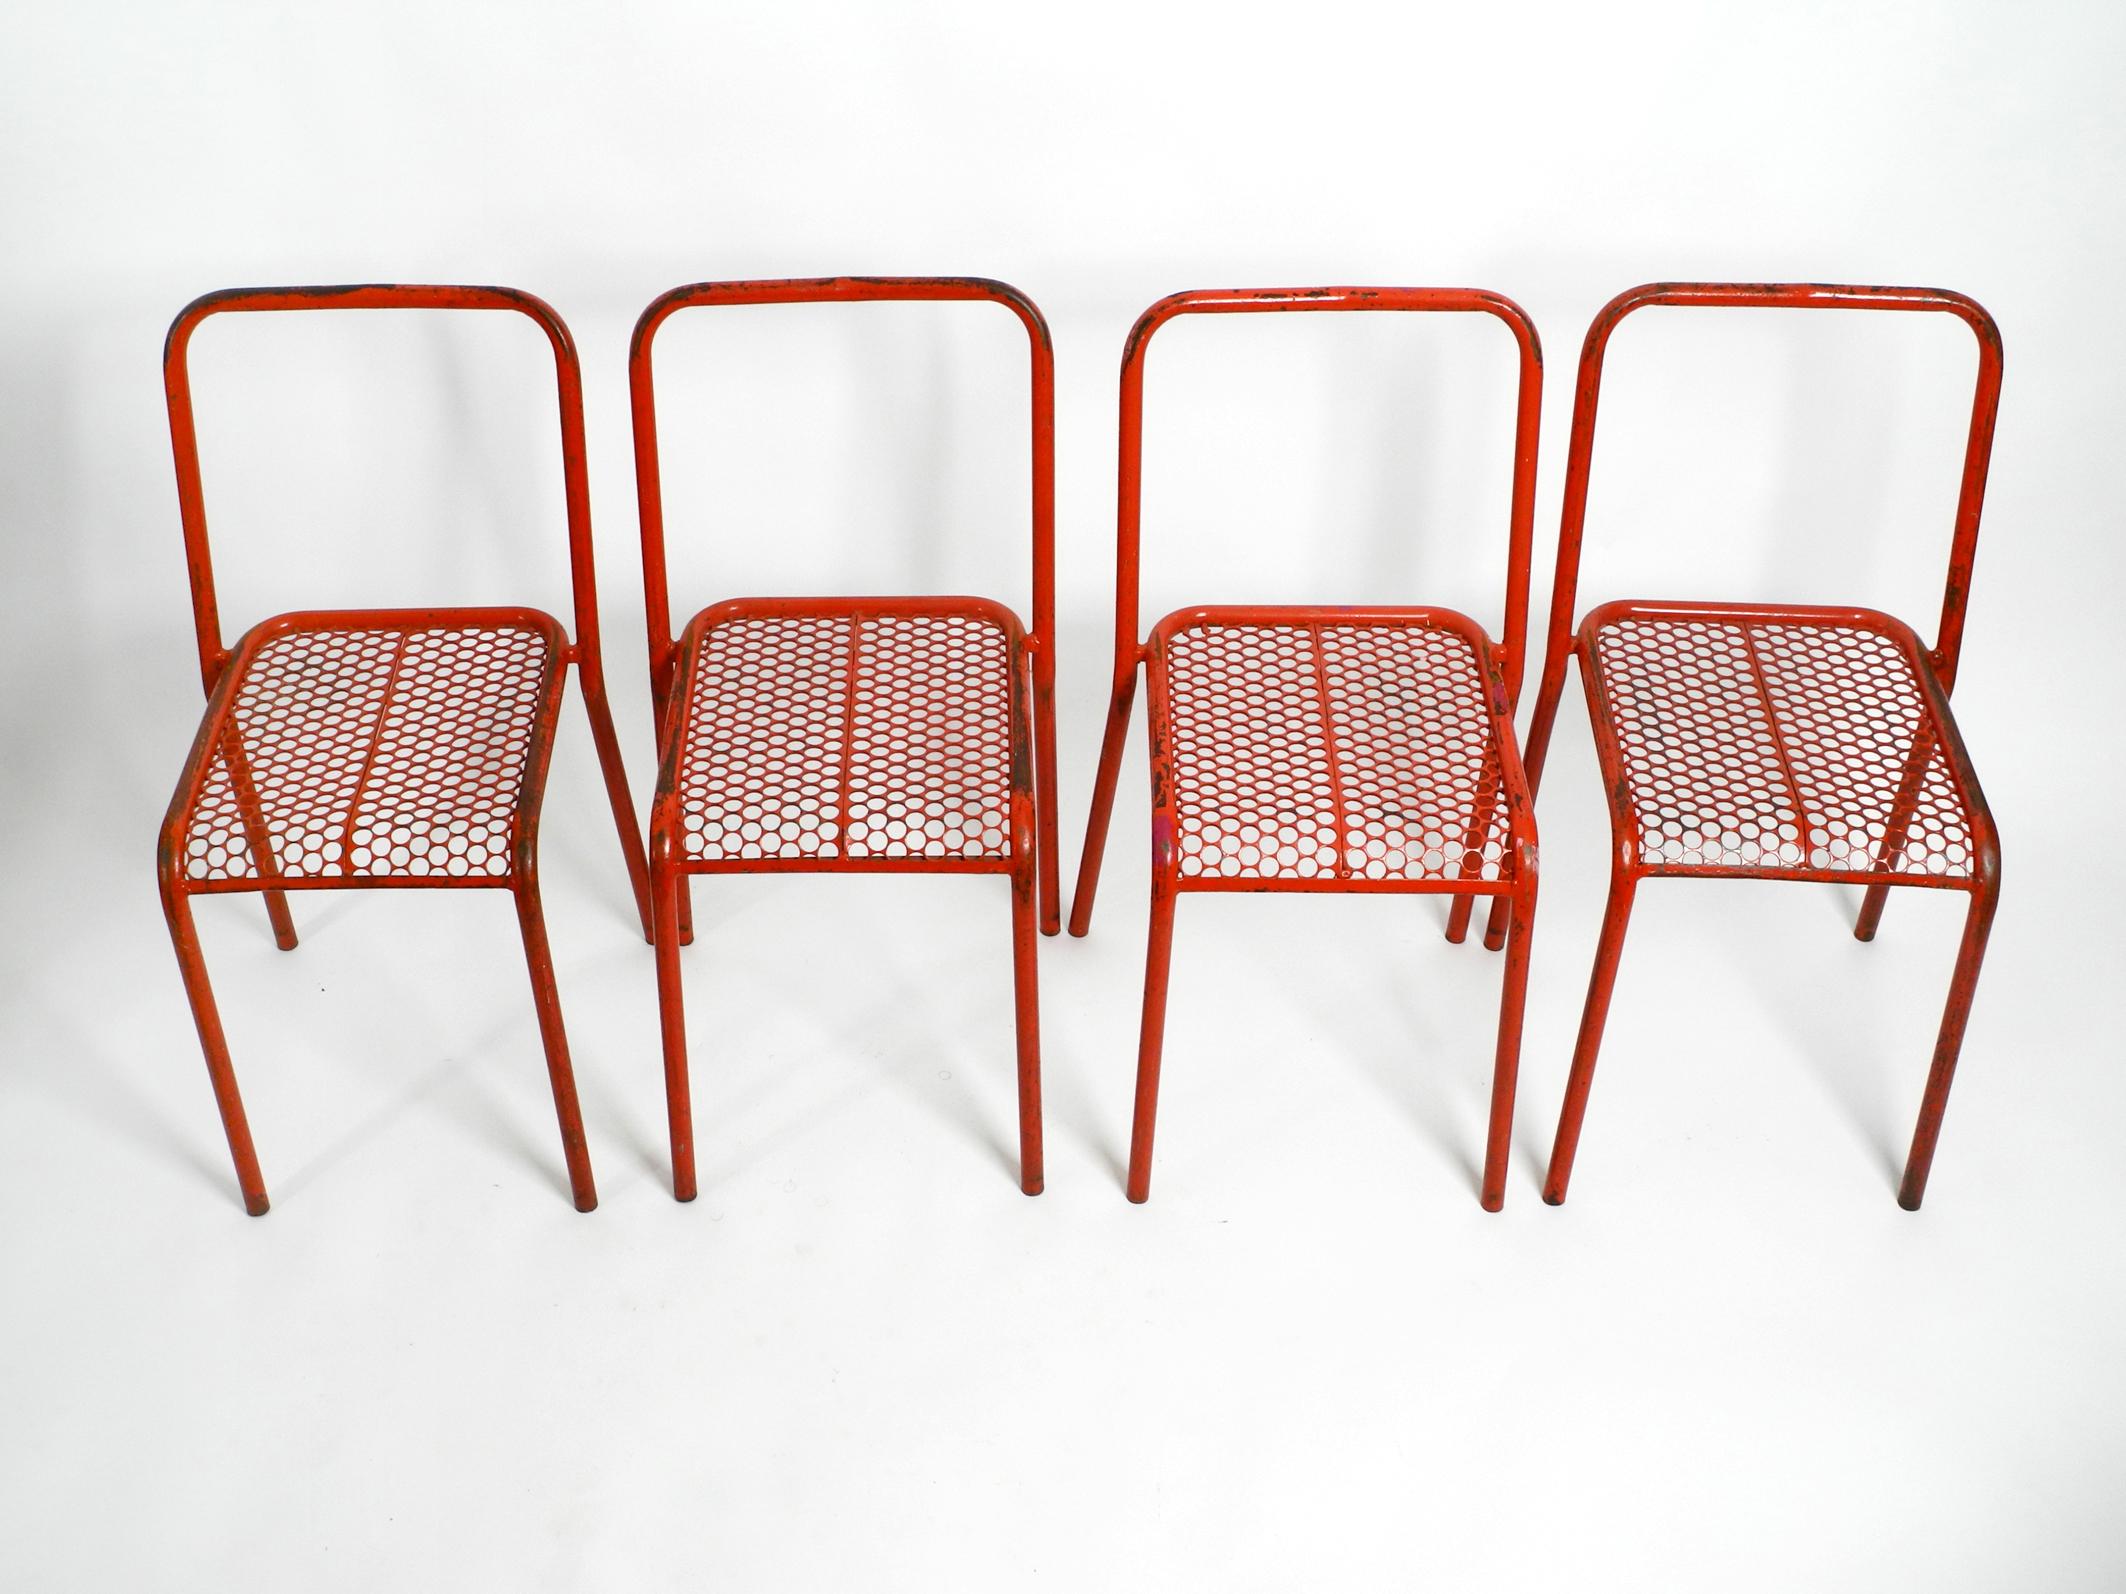 Four 1940s Industrial Metal Chairs by Réne Malaval in Their Original Red Color 14